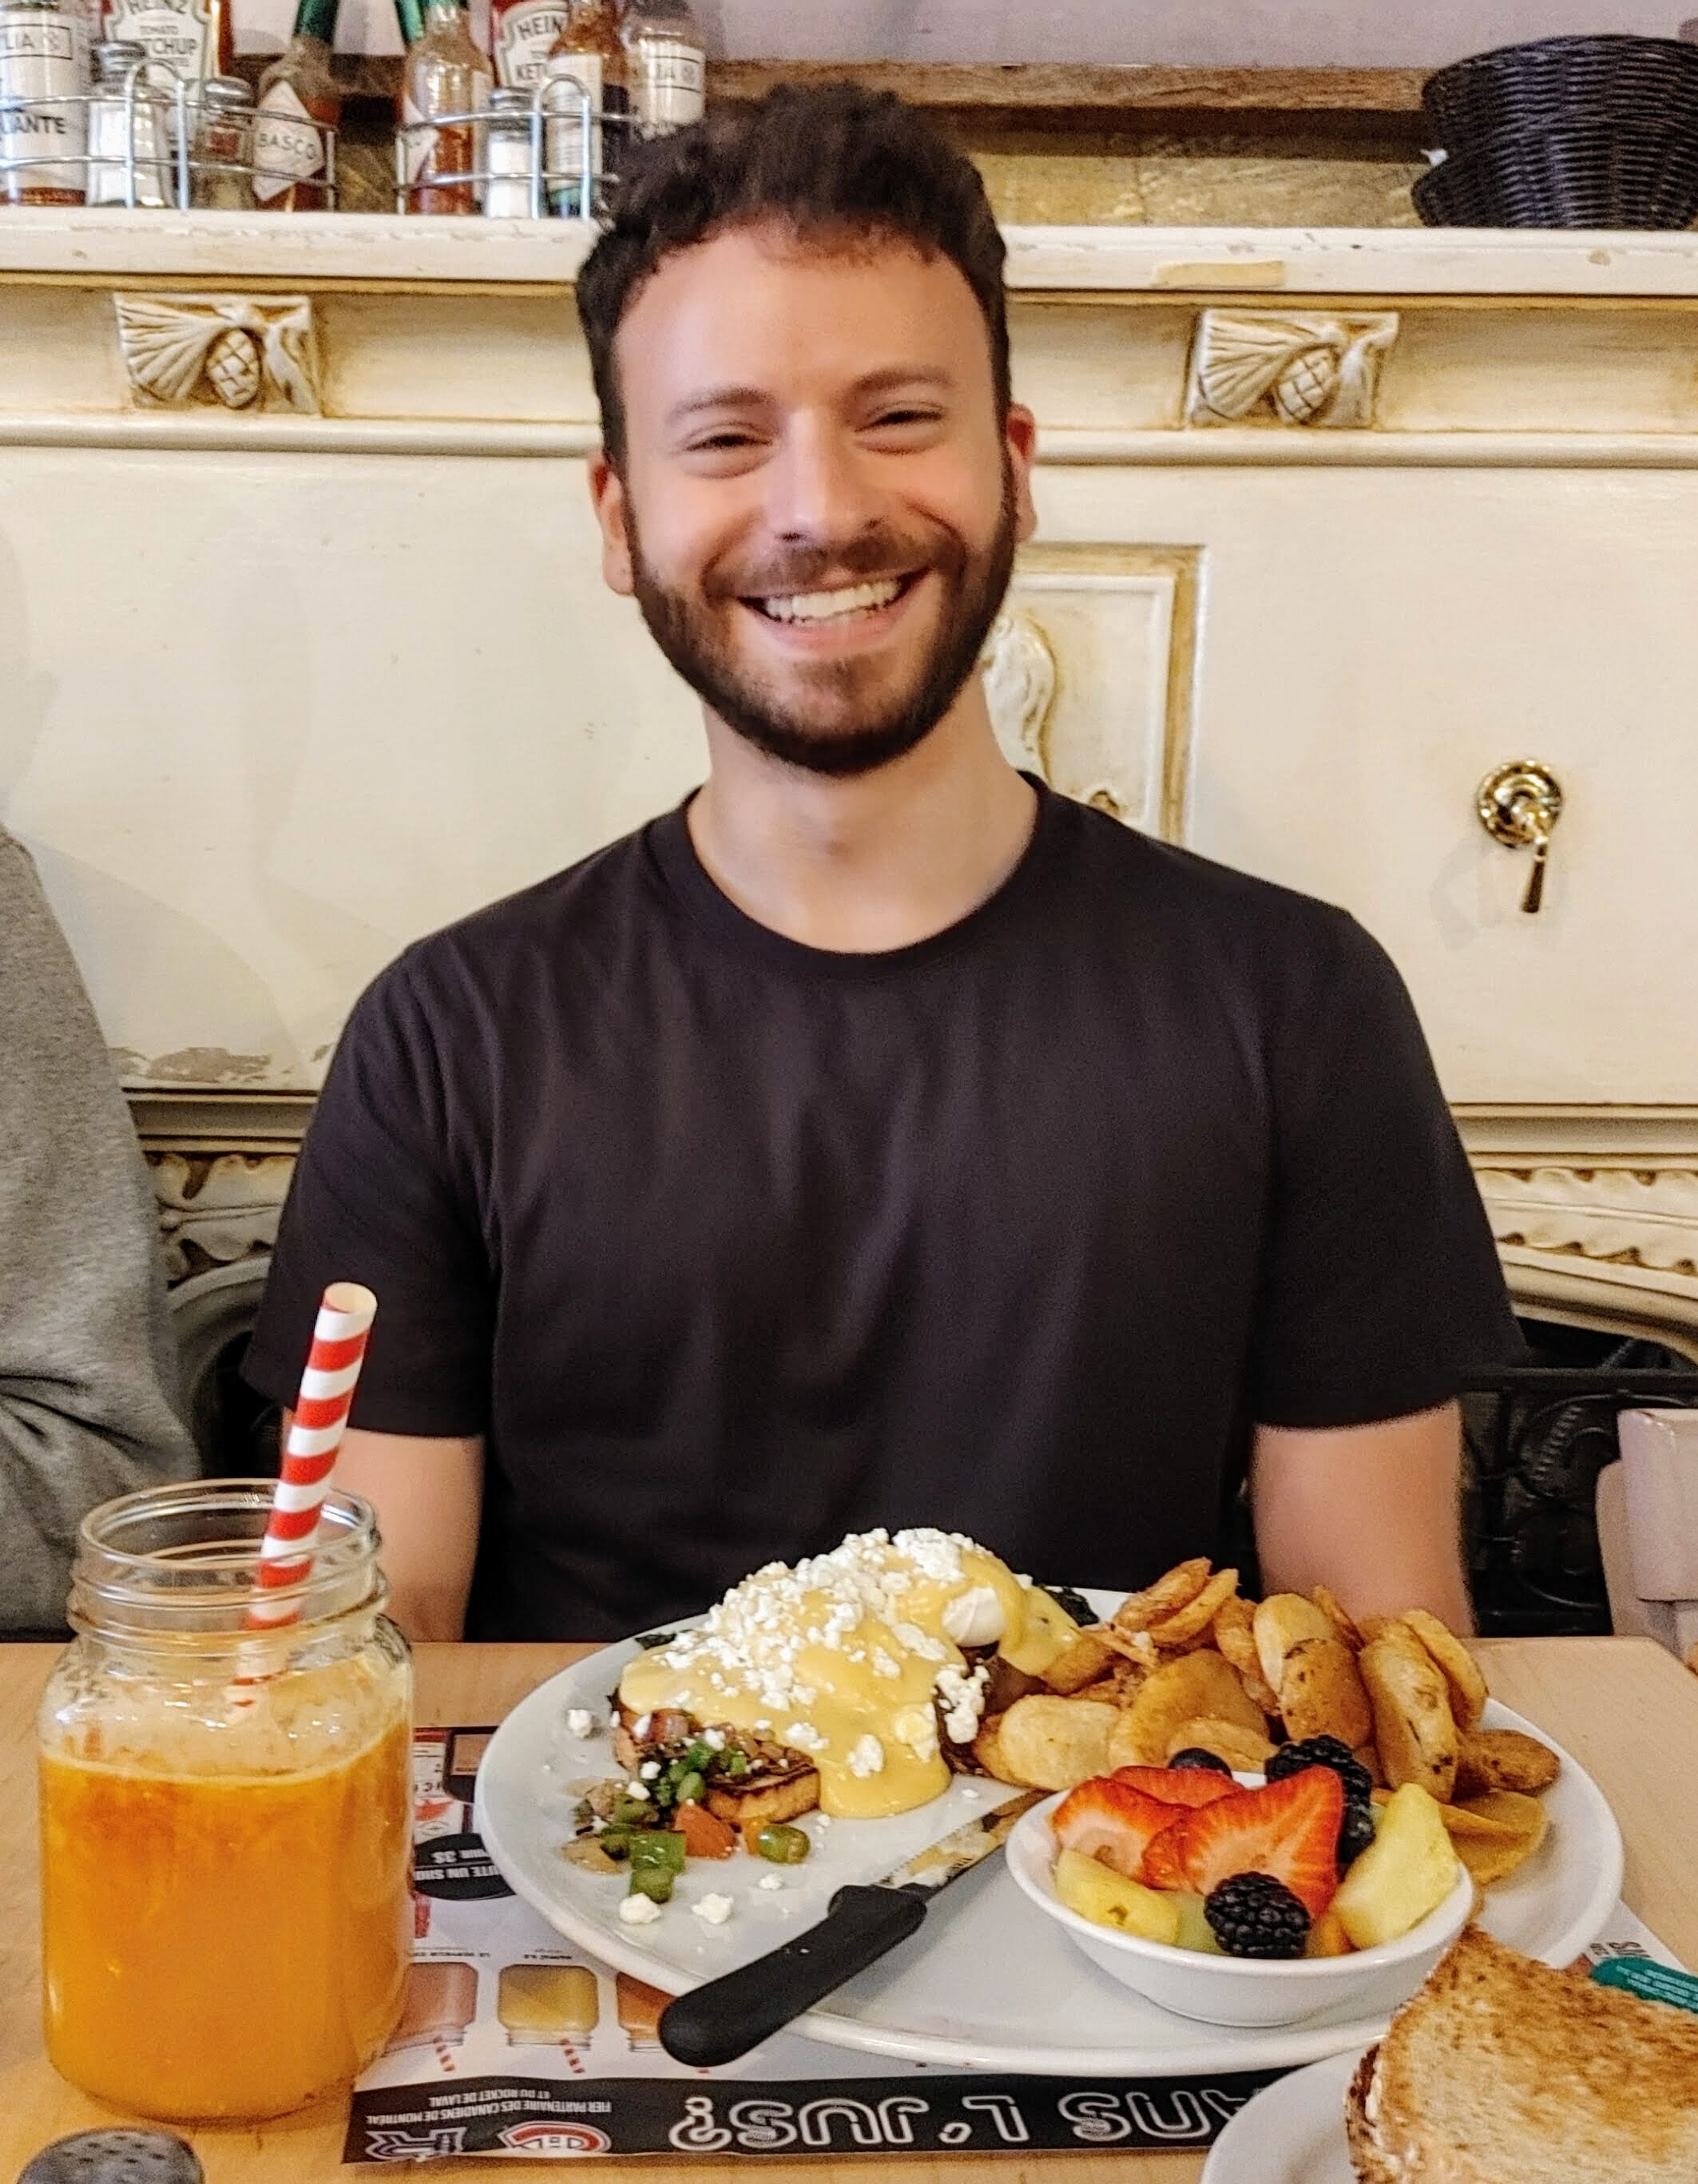 Abe eating a colossal brunch in Montreal.